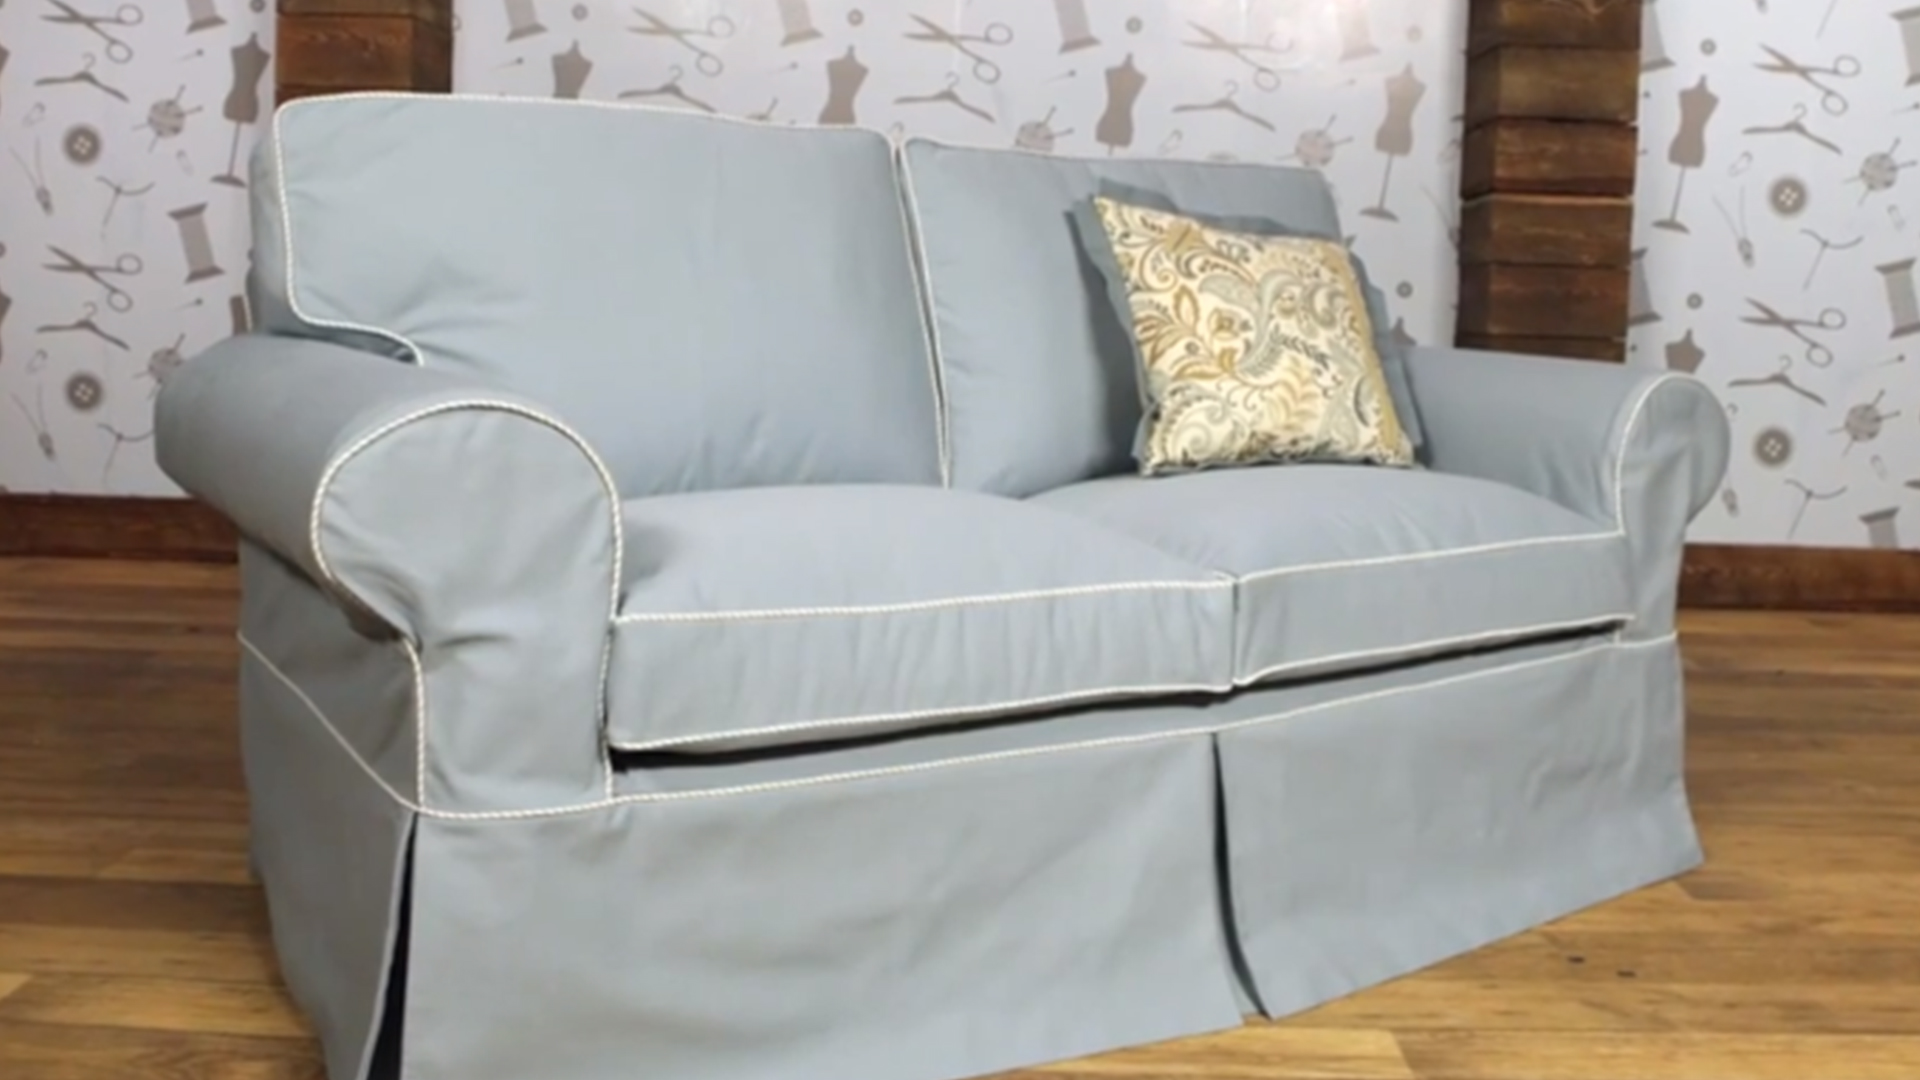 Back Cushion Slipcover Designs + Sewing Tutorials – The Slipcover